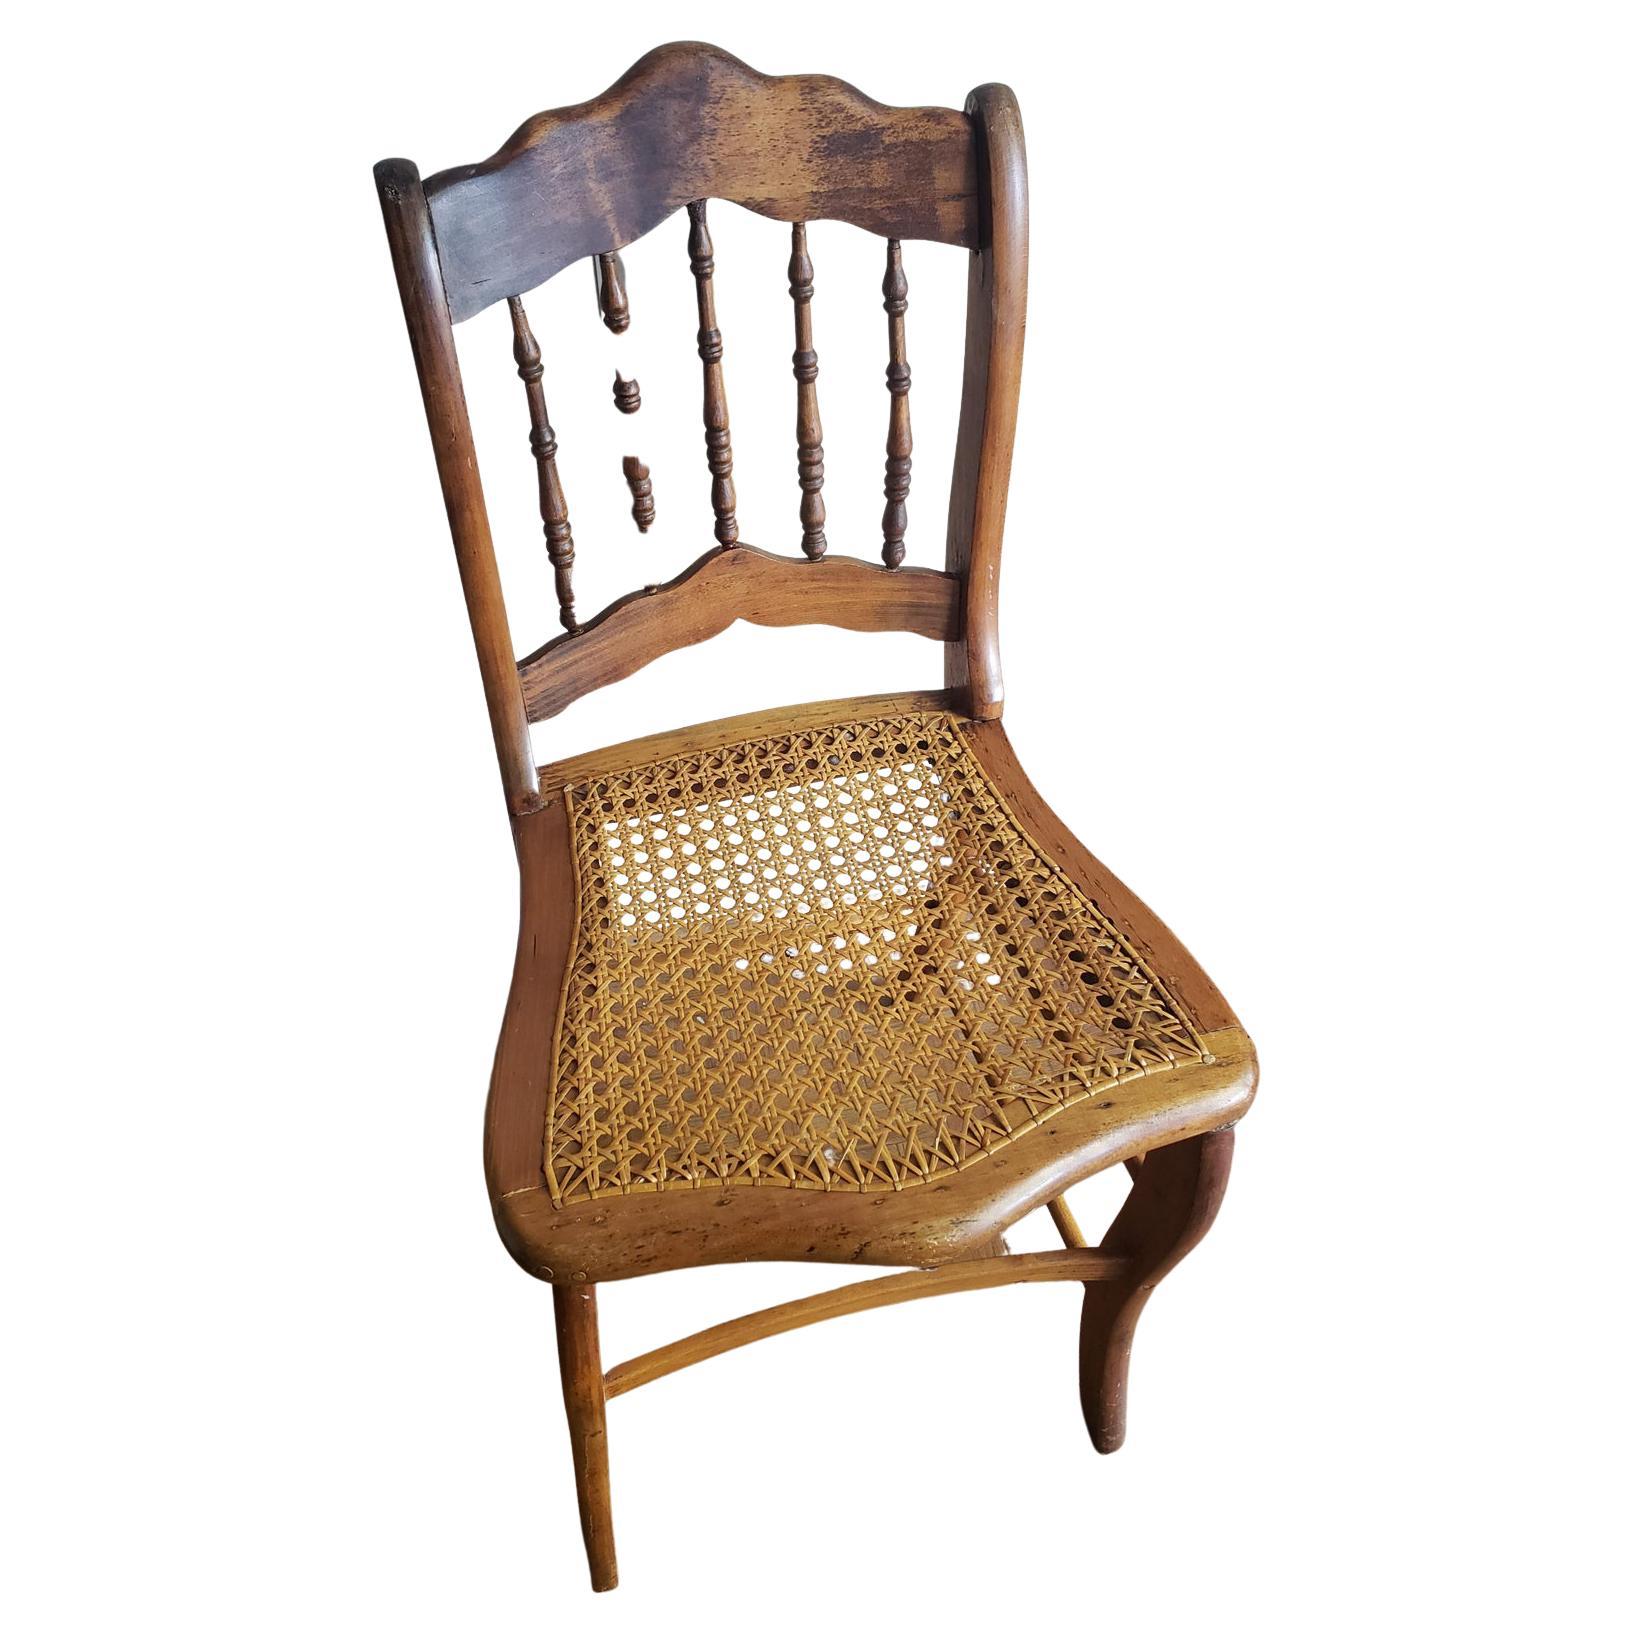 Mid 19th Century Maple Spindle Back Caned Seat Chair For Sale 1